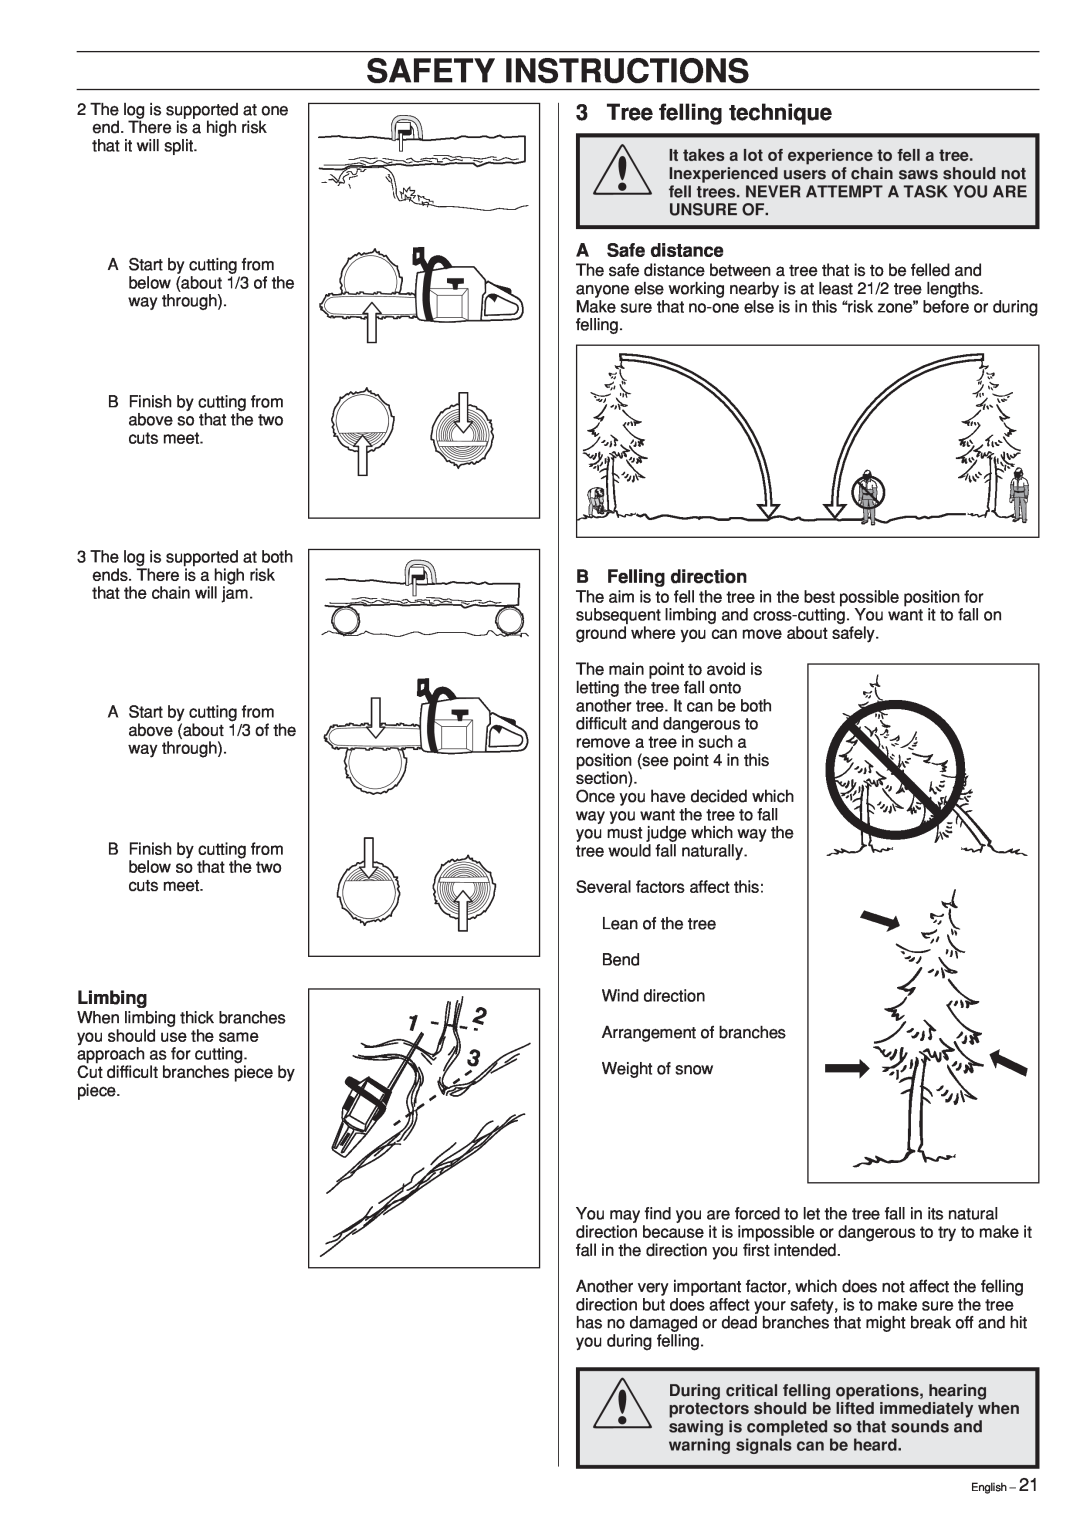 Husqvarna 339XP manual 3Tree felling technique, A Safe distance, Limbing, B Felling direction, Safety Instructions 